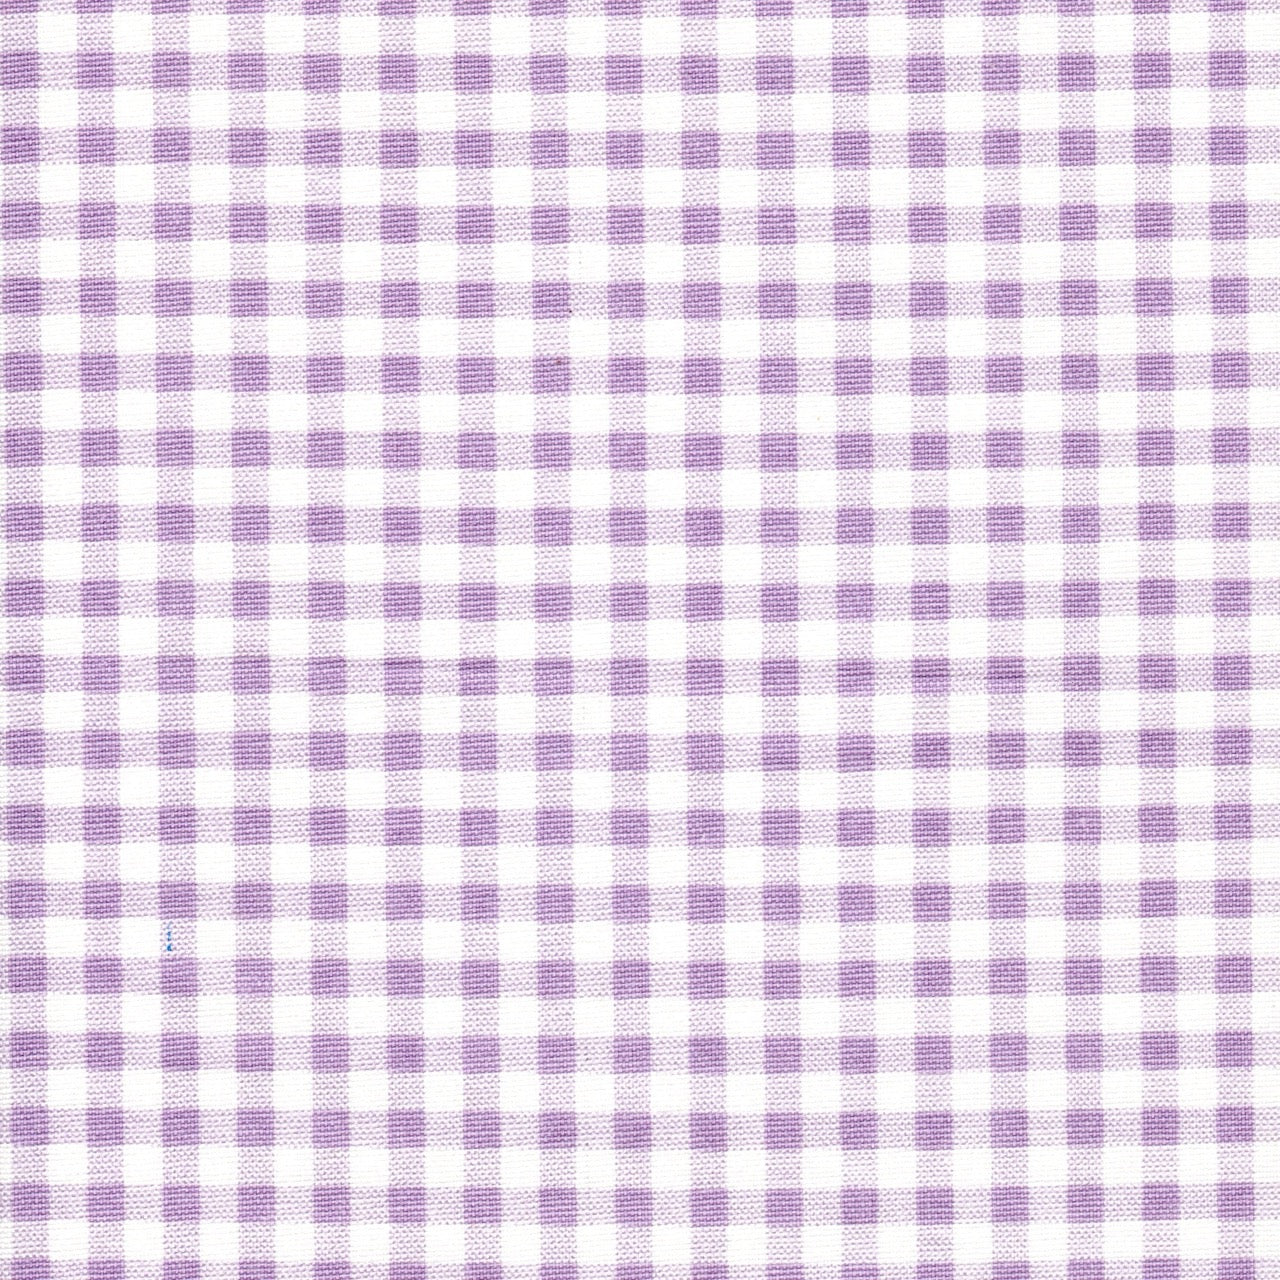 Shower Curtain in Orchid Large Gingham Check on White